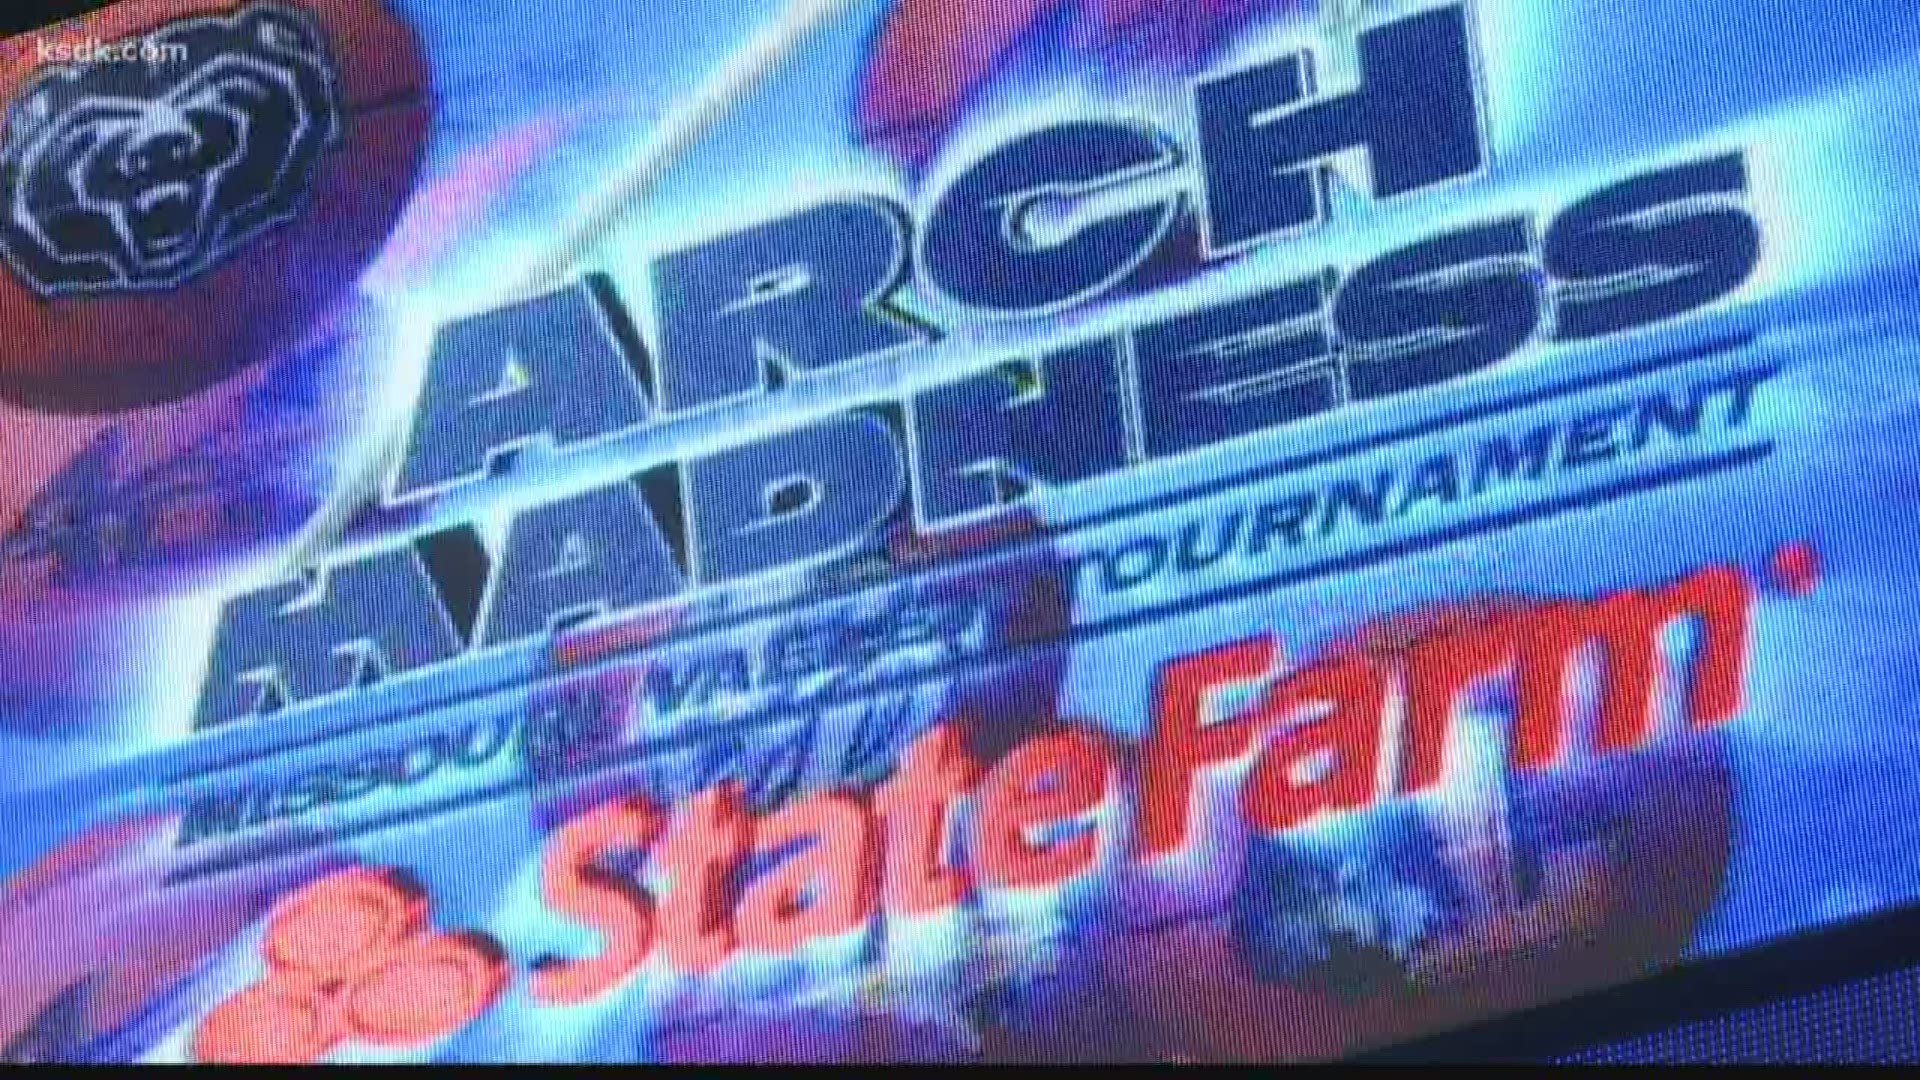 Next year at Enterprise Center will mark 30 years of Arch Madness at the same arena.